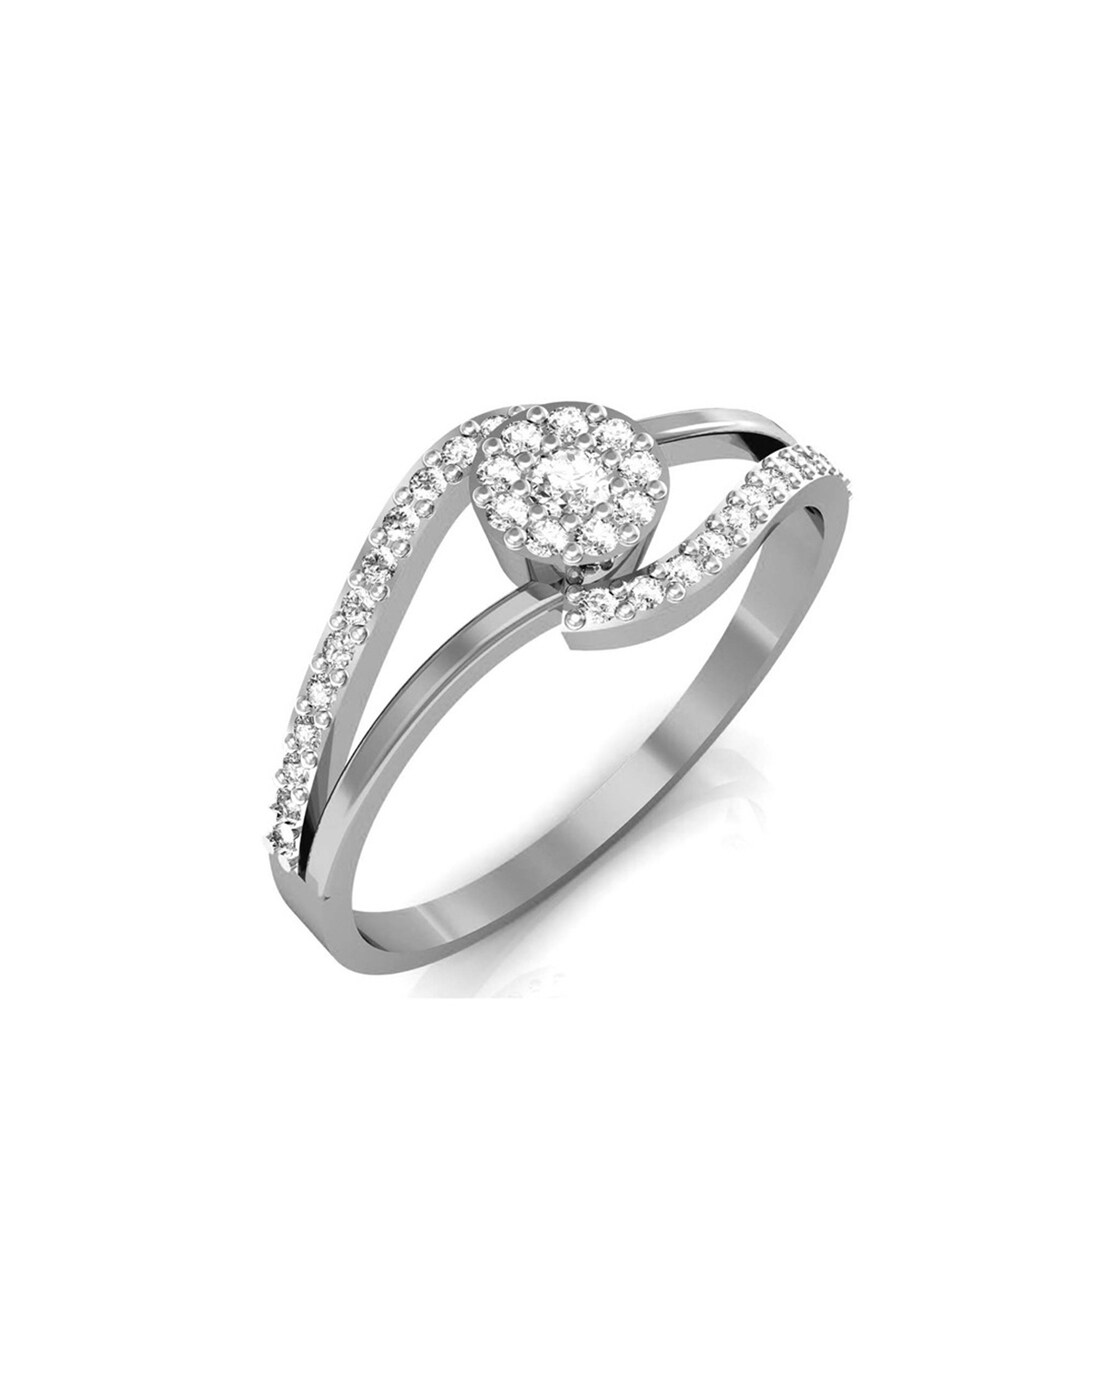 Buy White Gold Rings for Women by KuberBox Online | Ajio.com